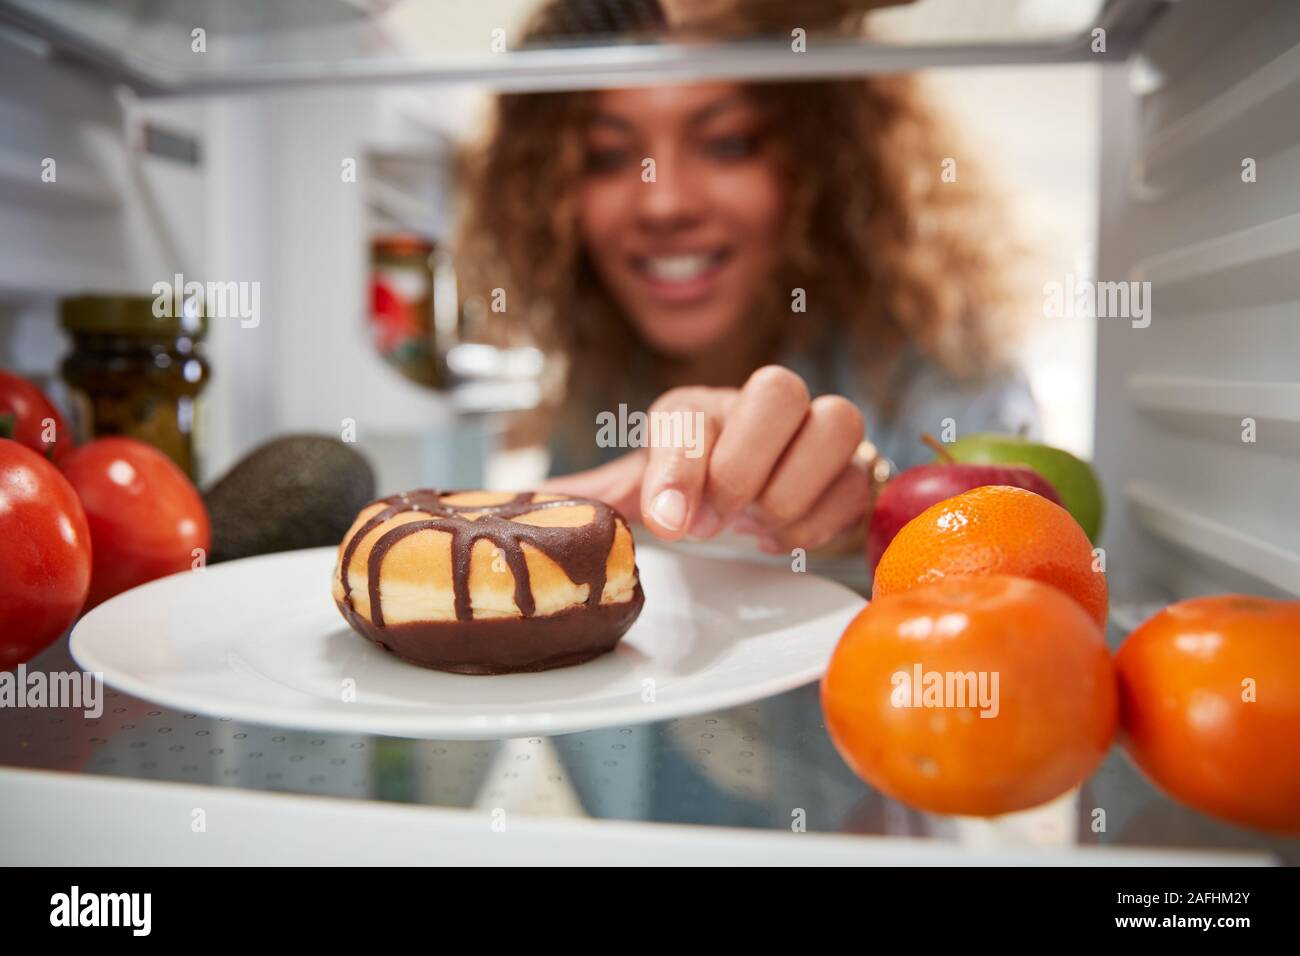 View Looking Out From Inside Of Refrigerator As Woman Opens Door And Reaches For Unhealthy Donut Stock Photo